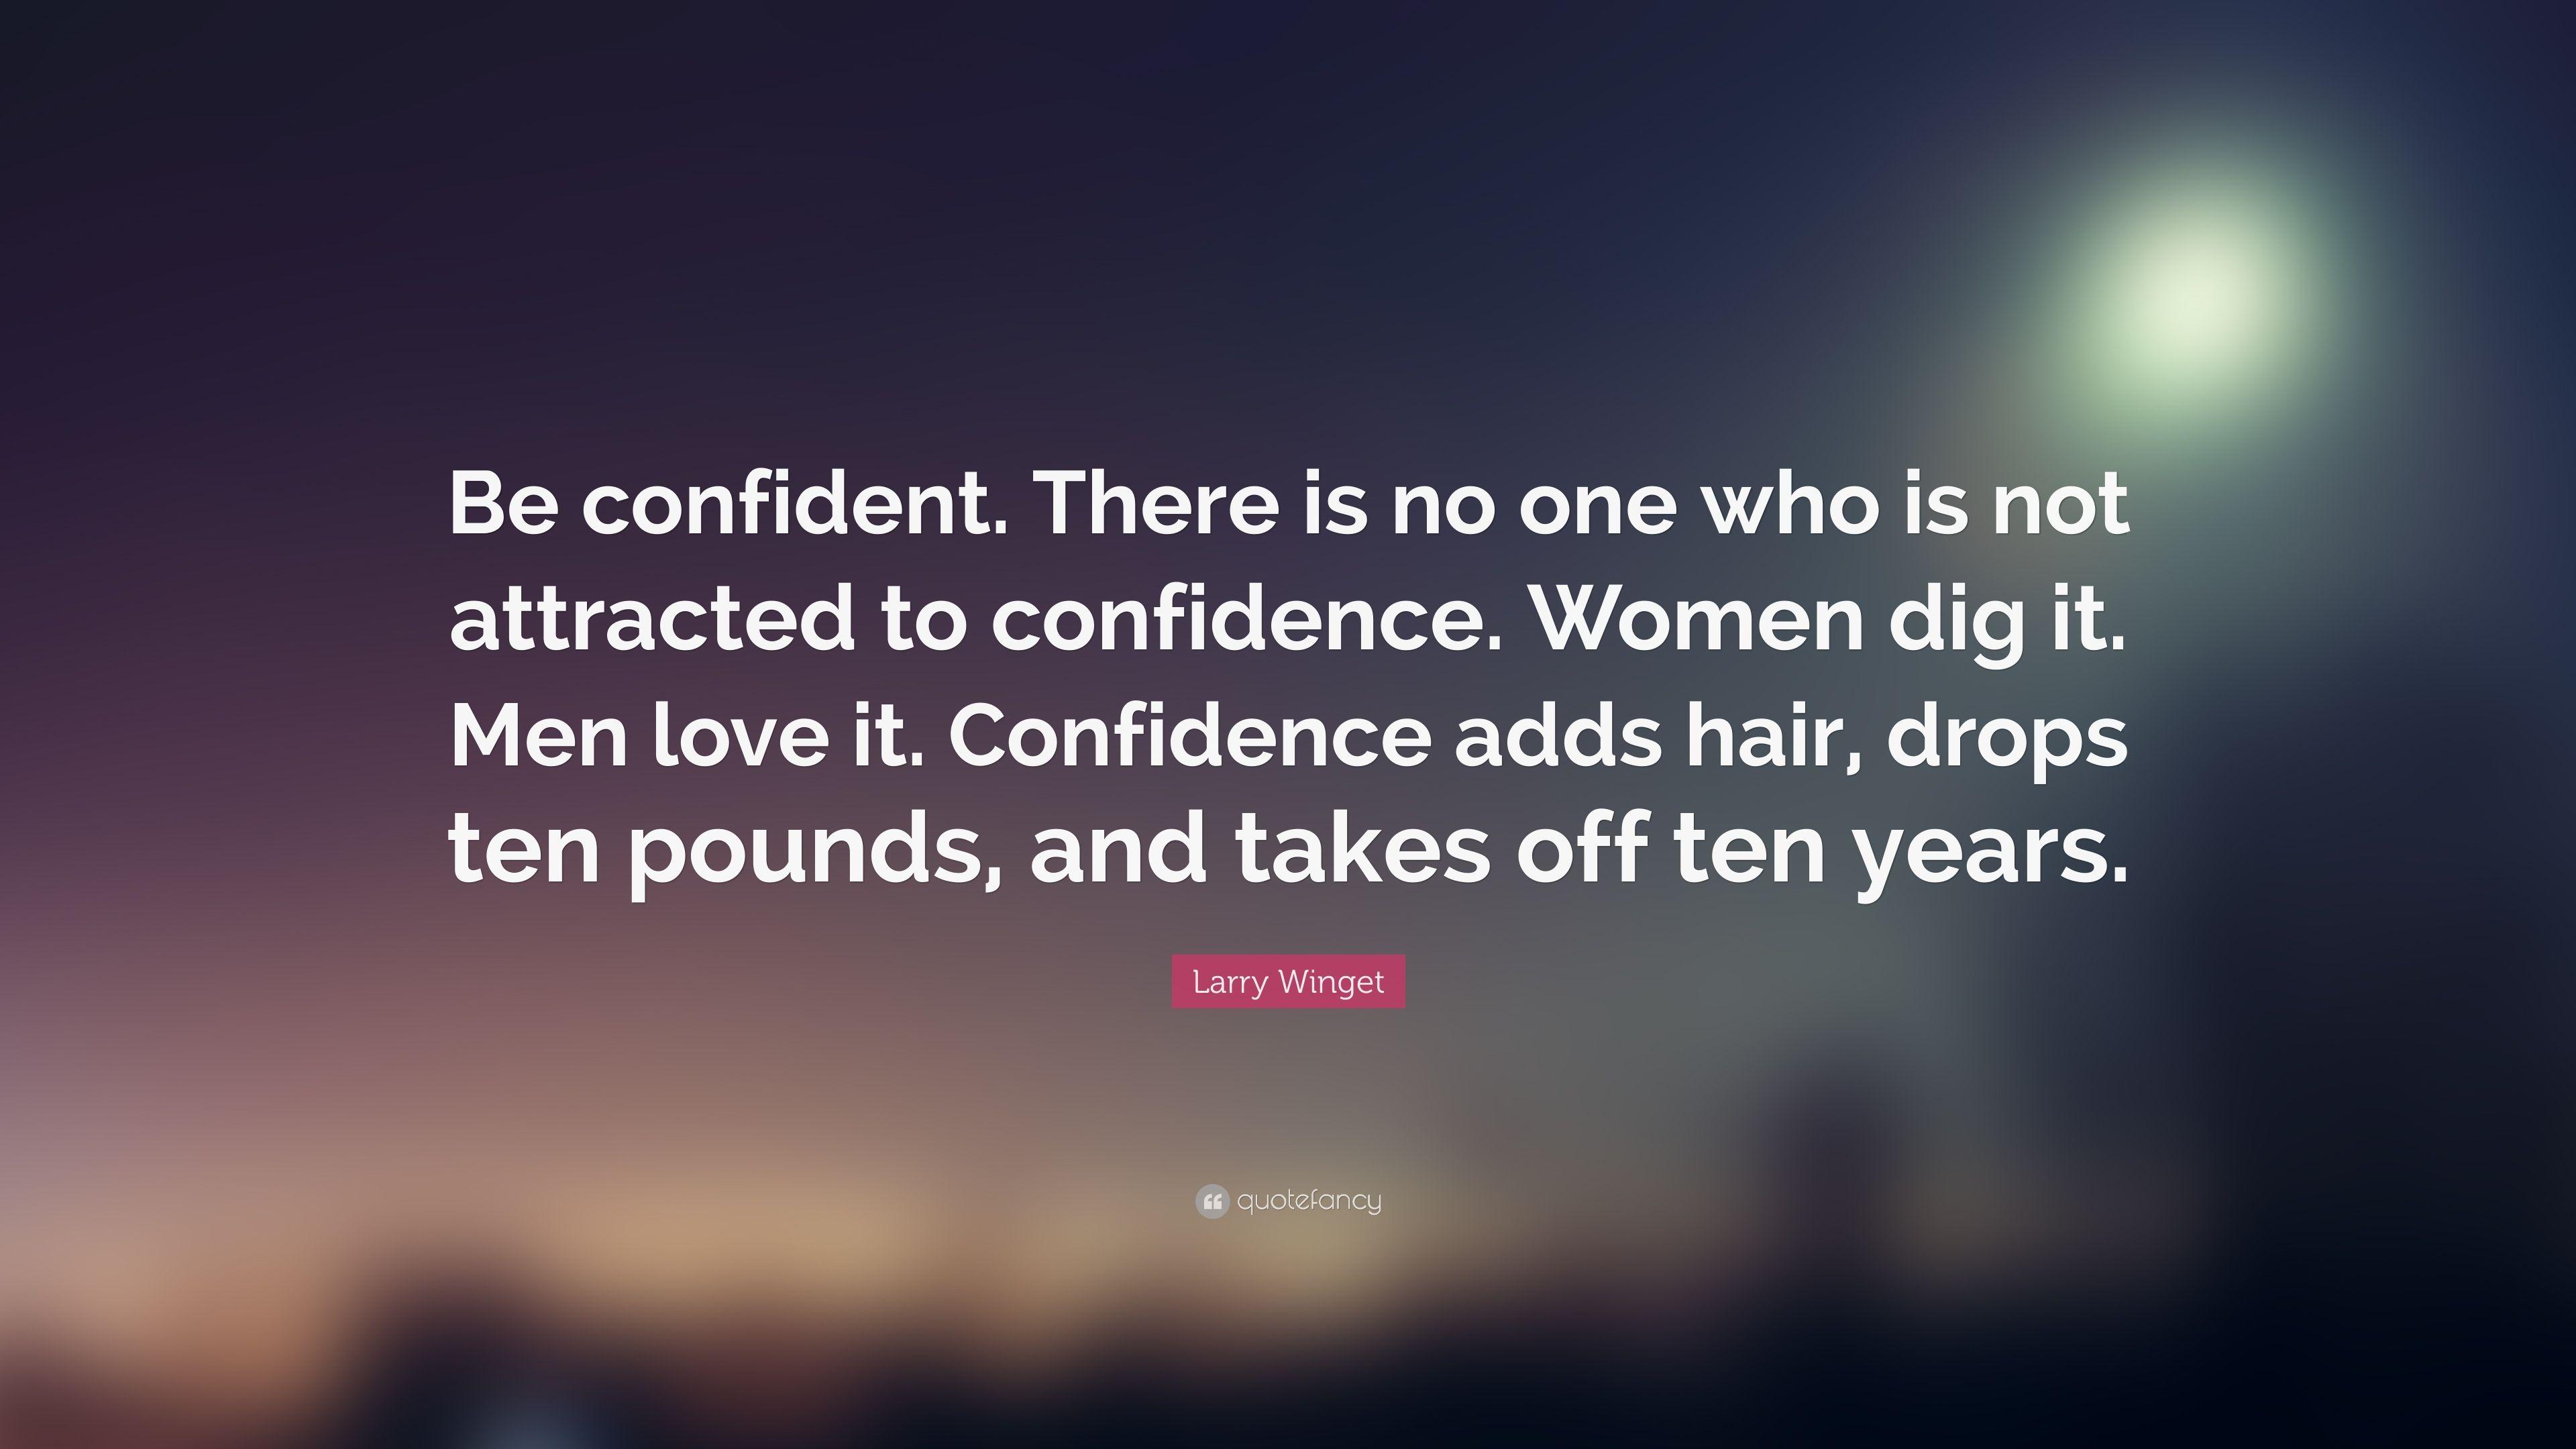 Larry Winget Quote: “Be confident. There is no one who is not